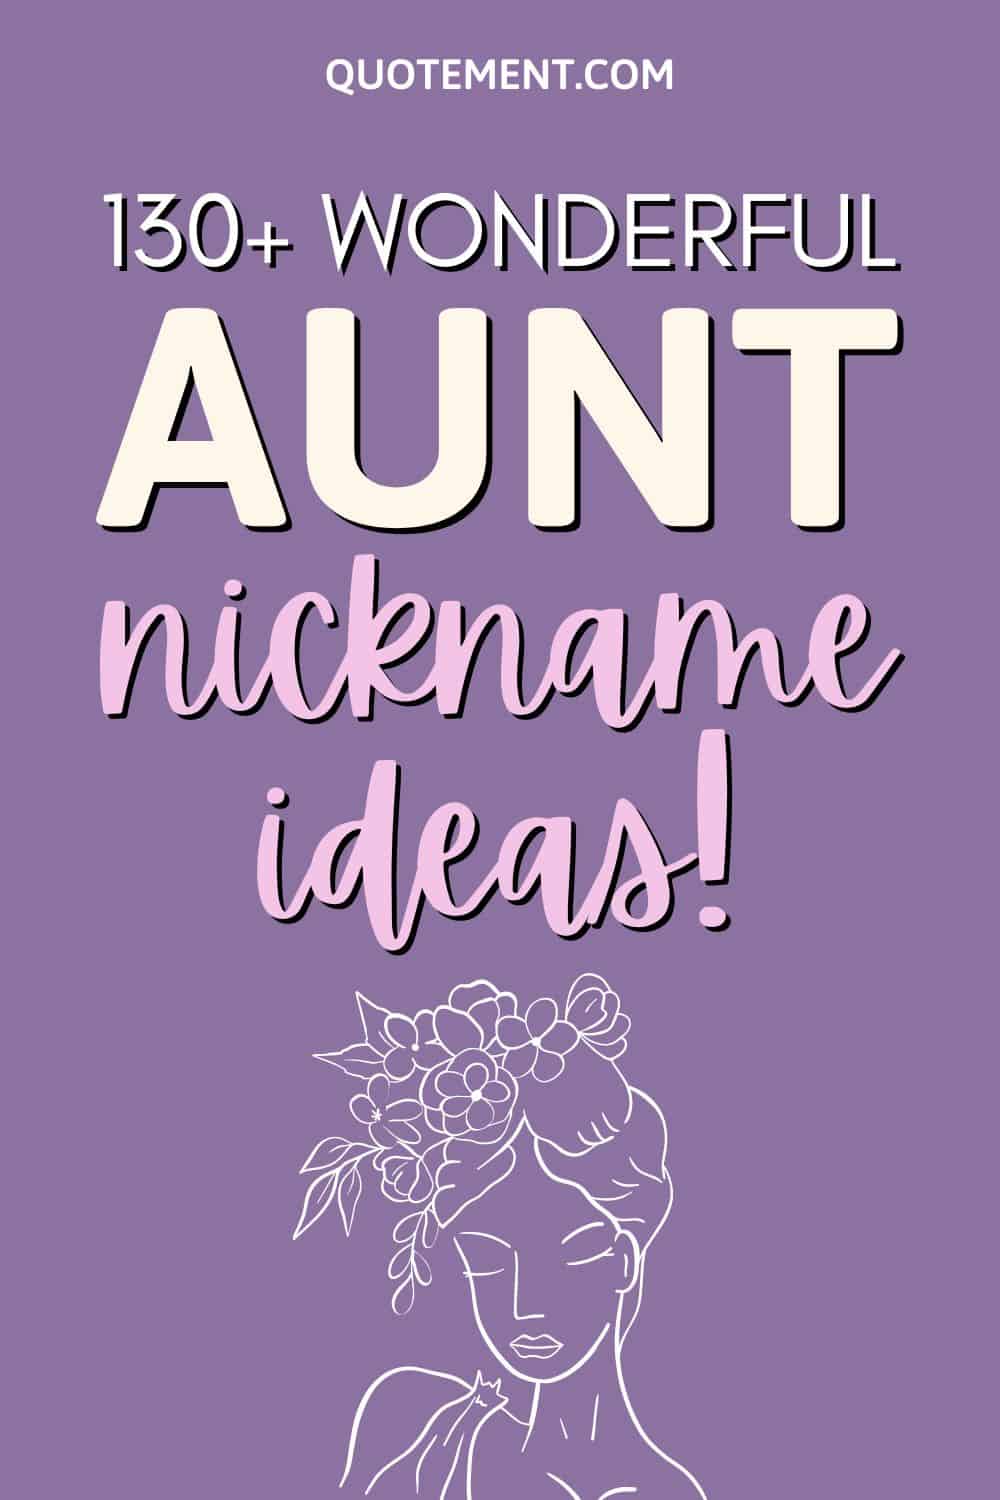 130+ Phenomenal Aunt Nicknames She Will Absolutely Adore